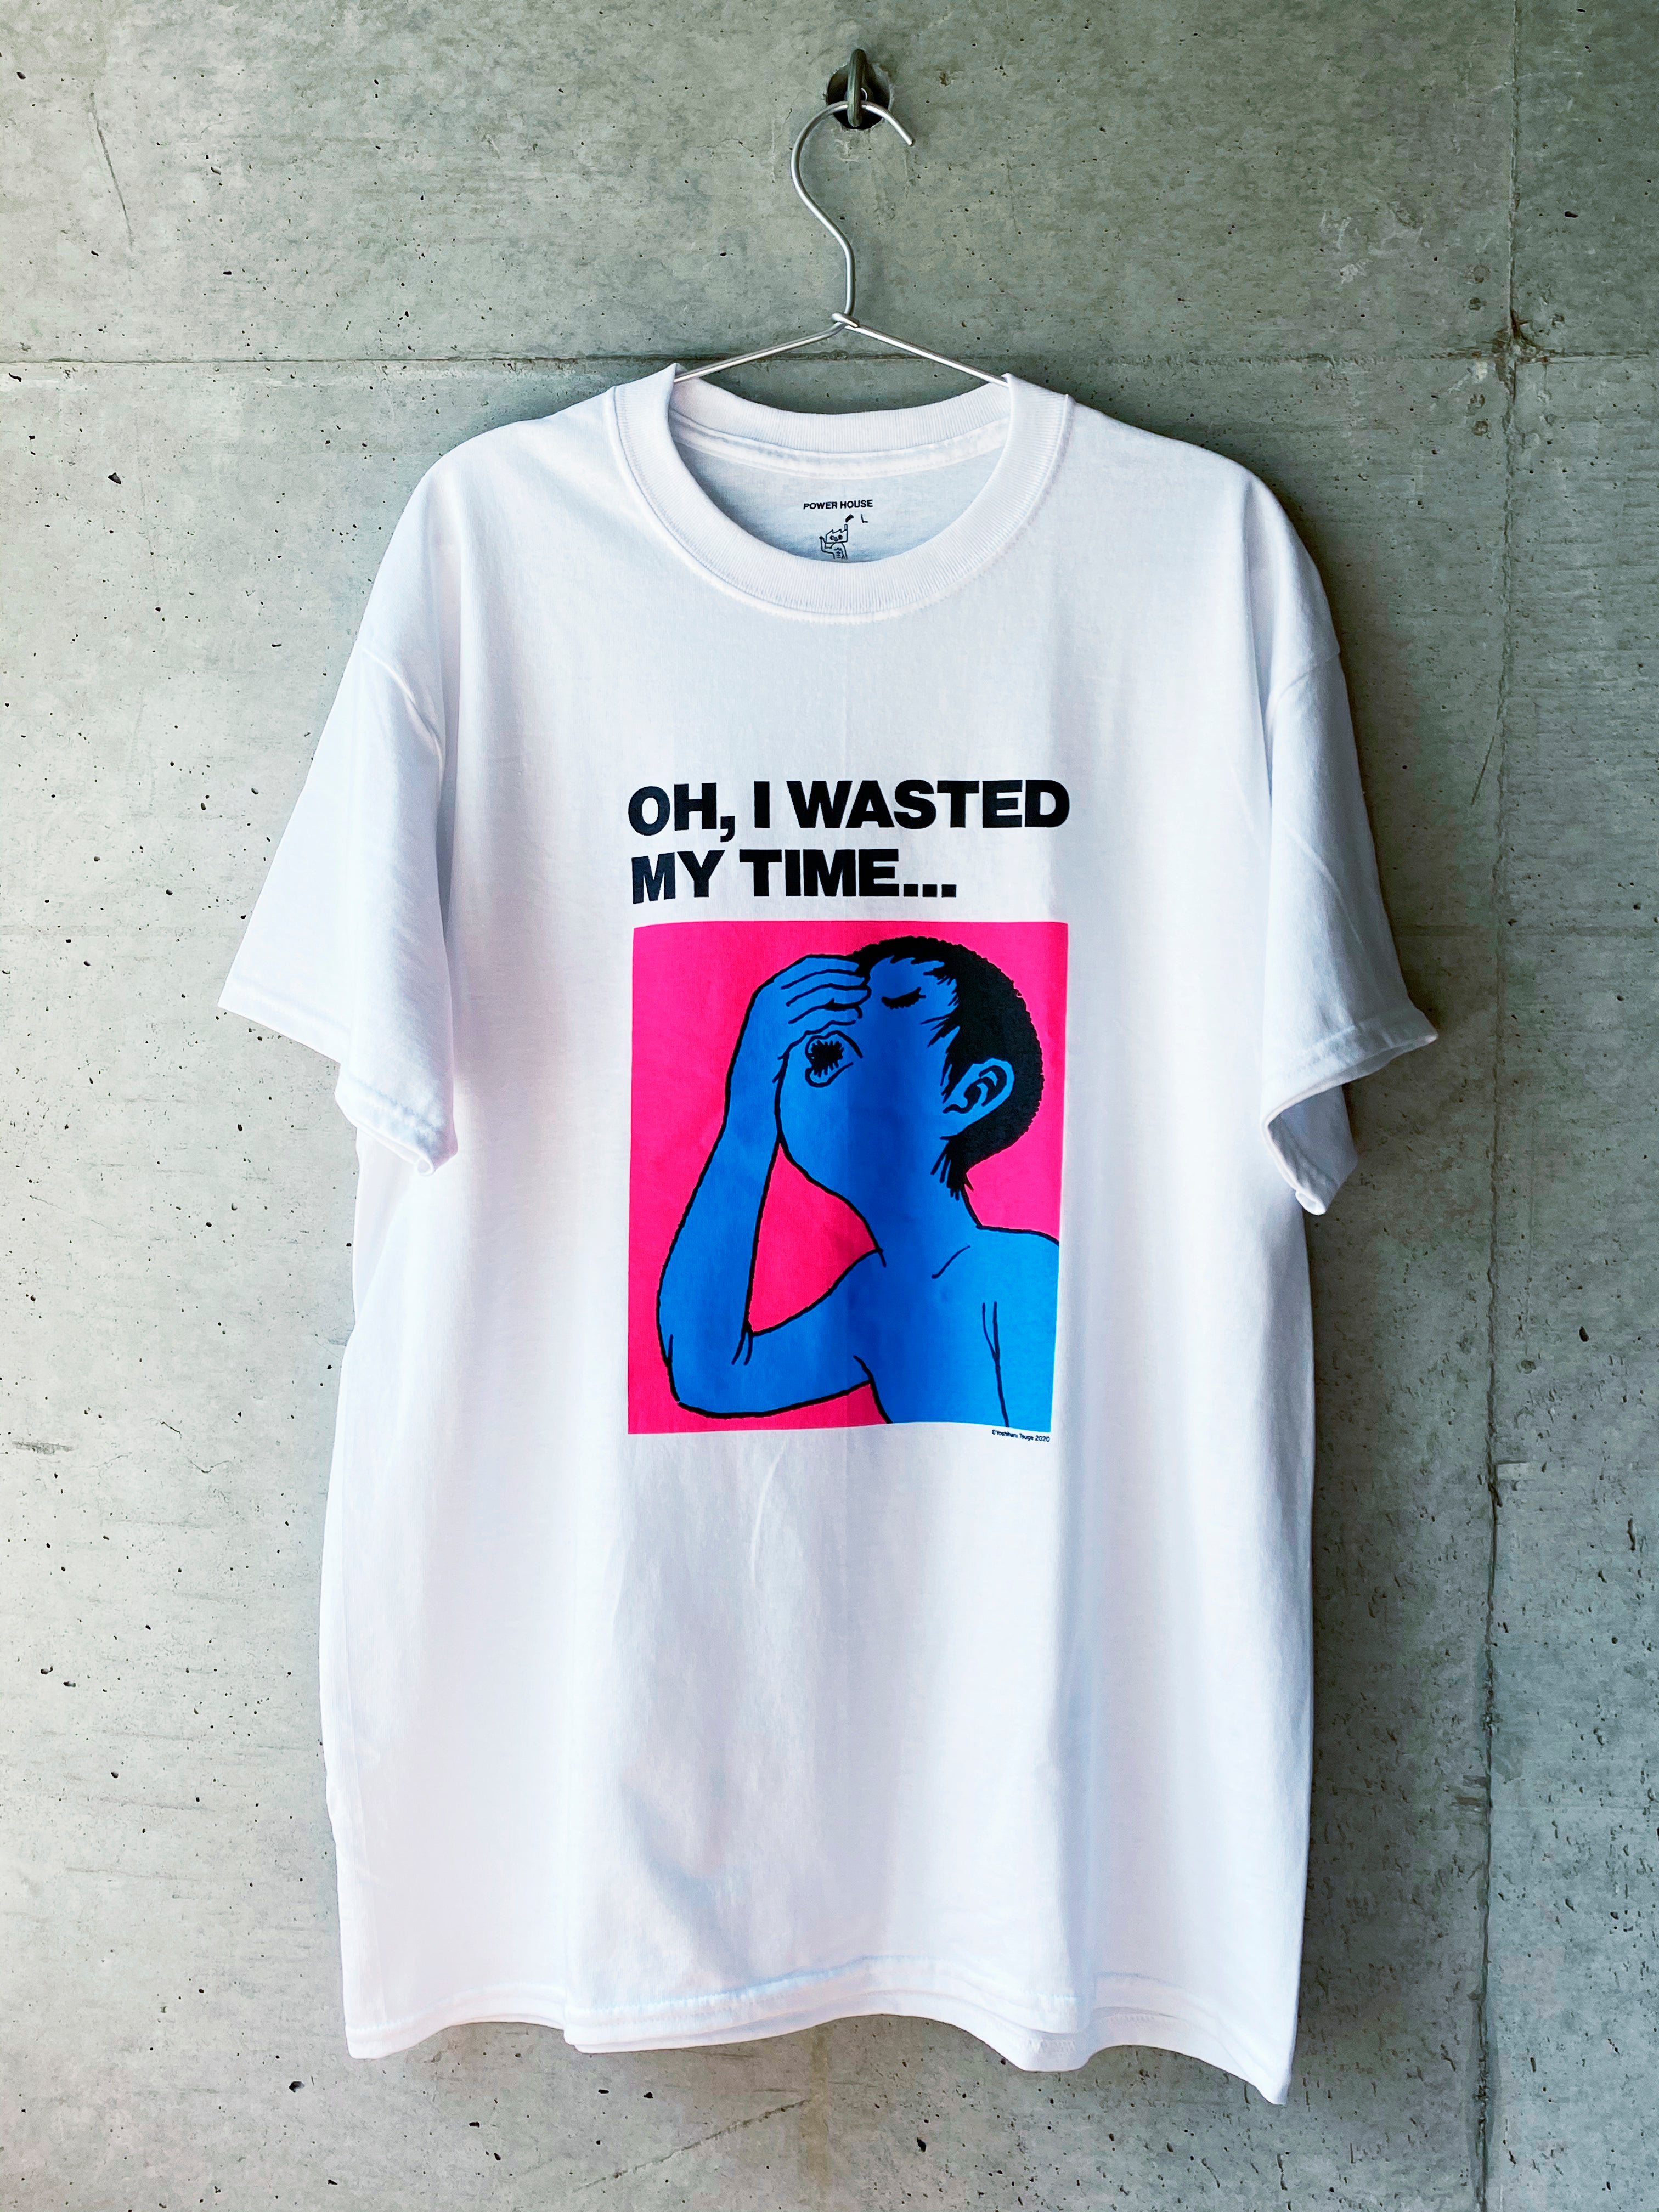 “OH, I WASTED MY TIME...” , つげTEE